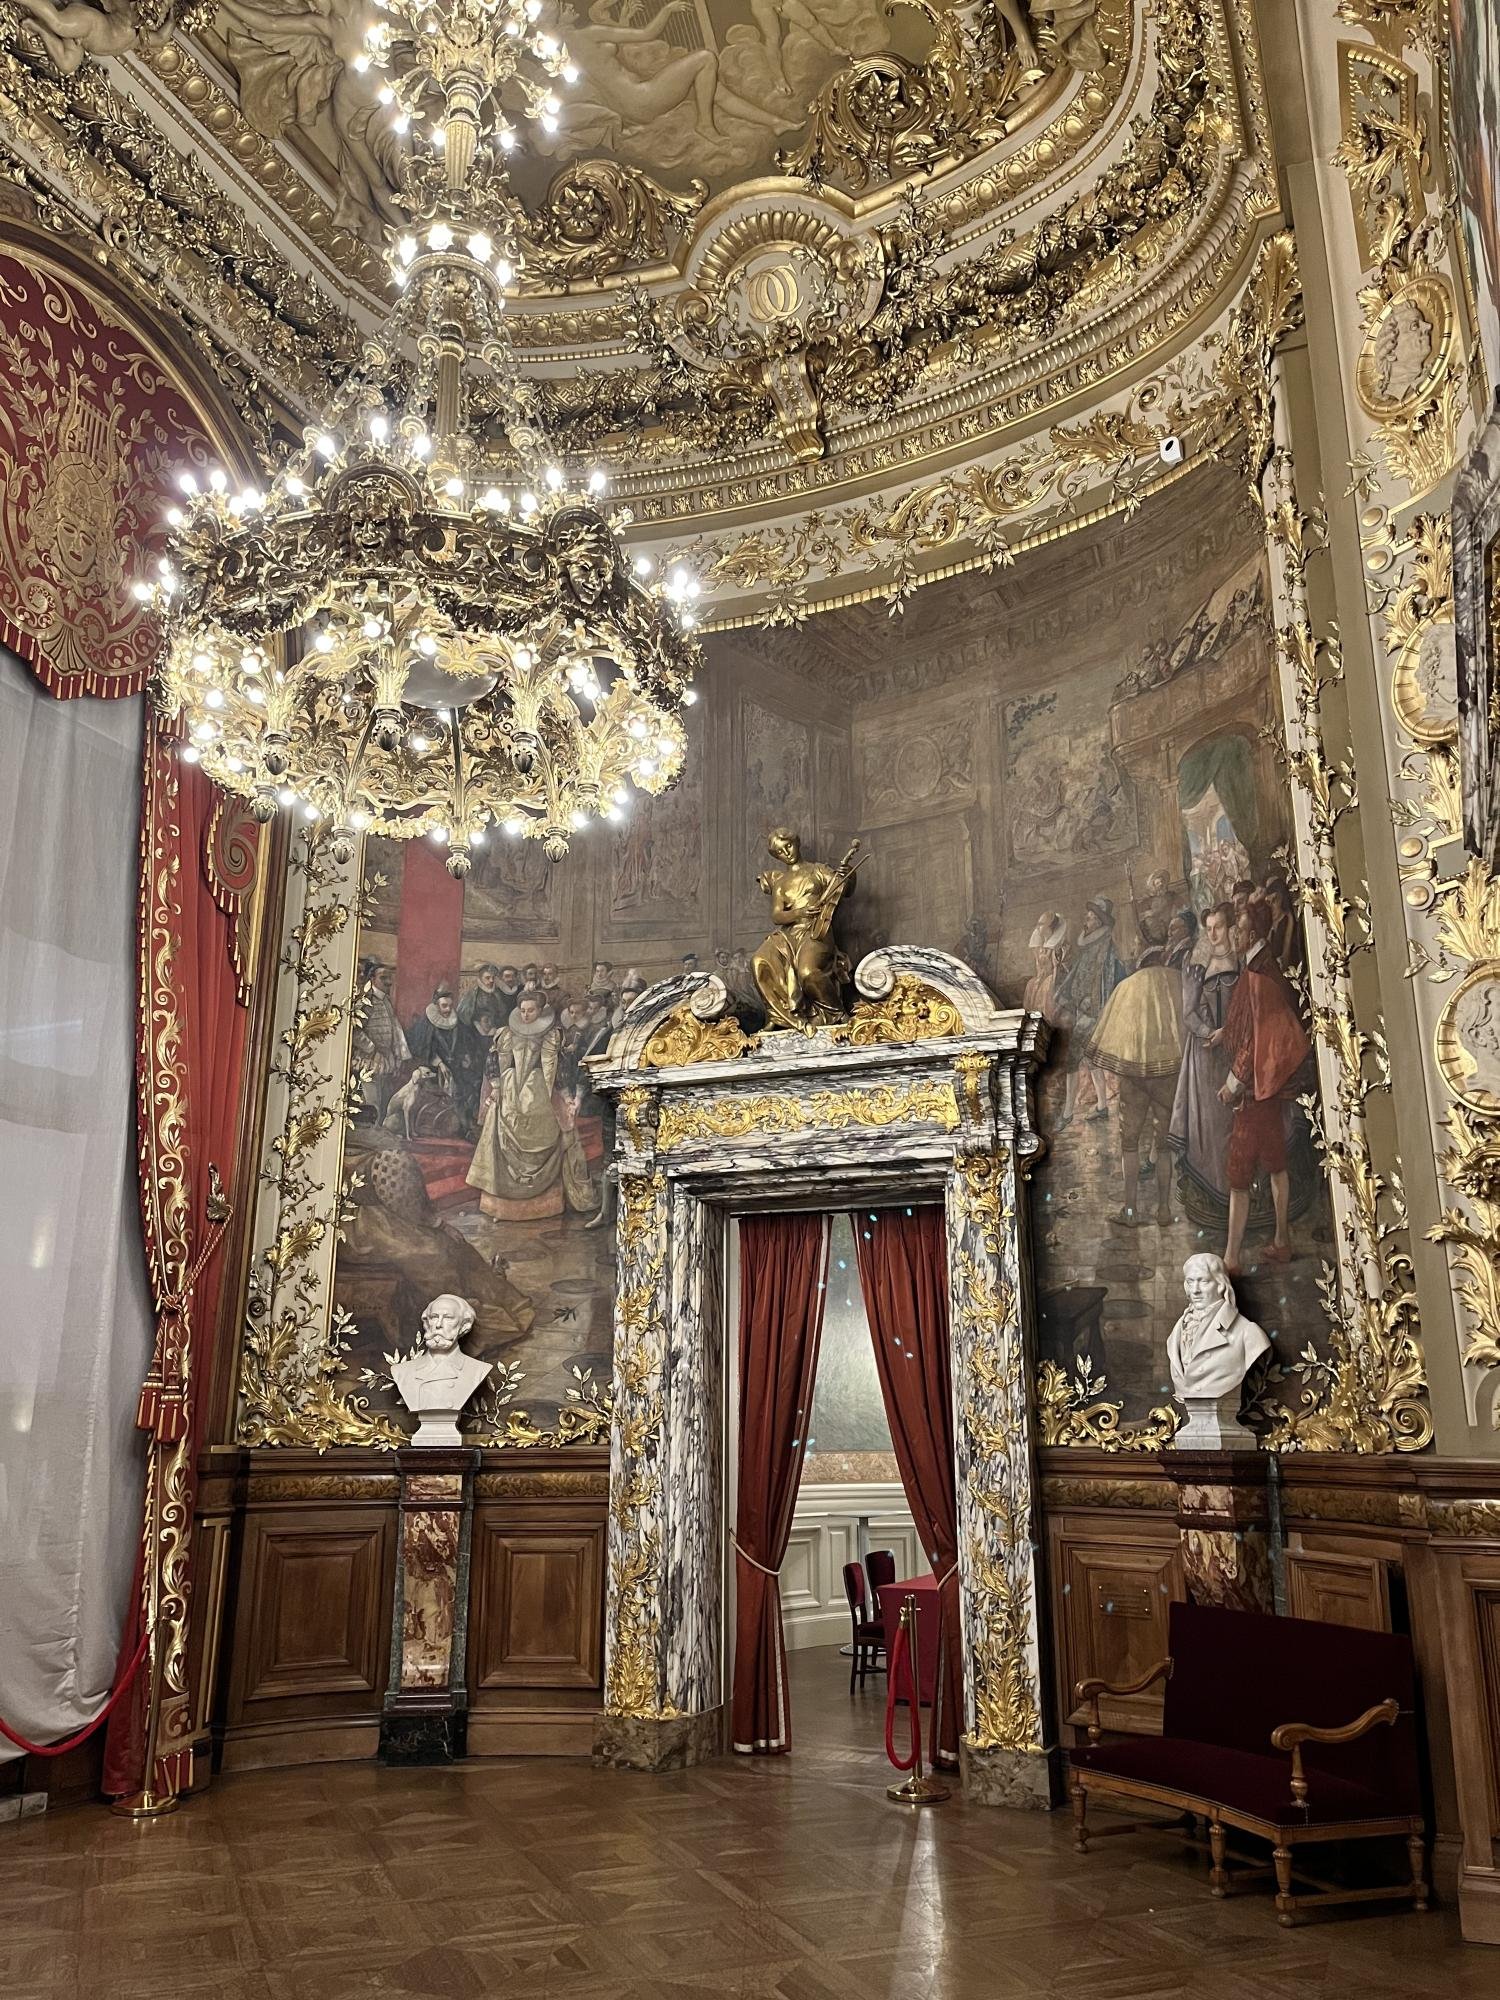 Within the Opera Comique, the Foyer welcomes all spectators in a large lobby with painted walls and gold decorations.